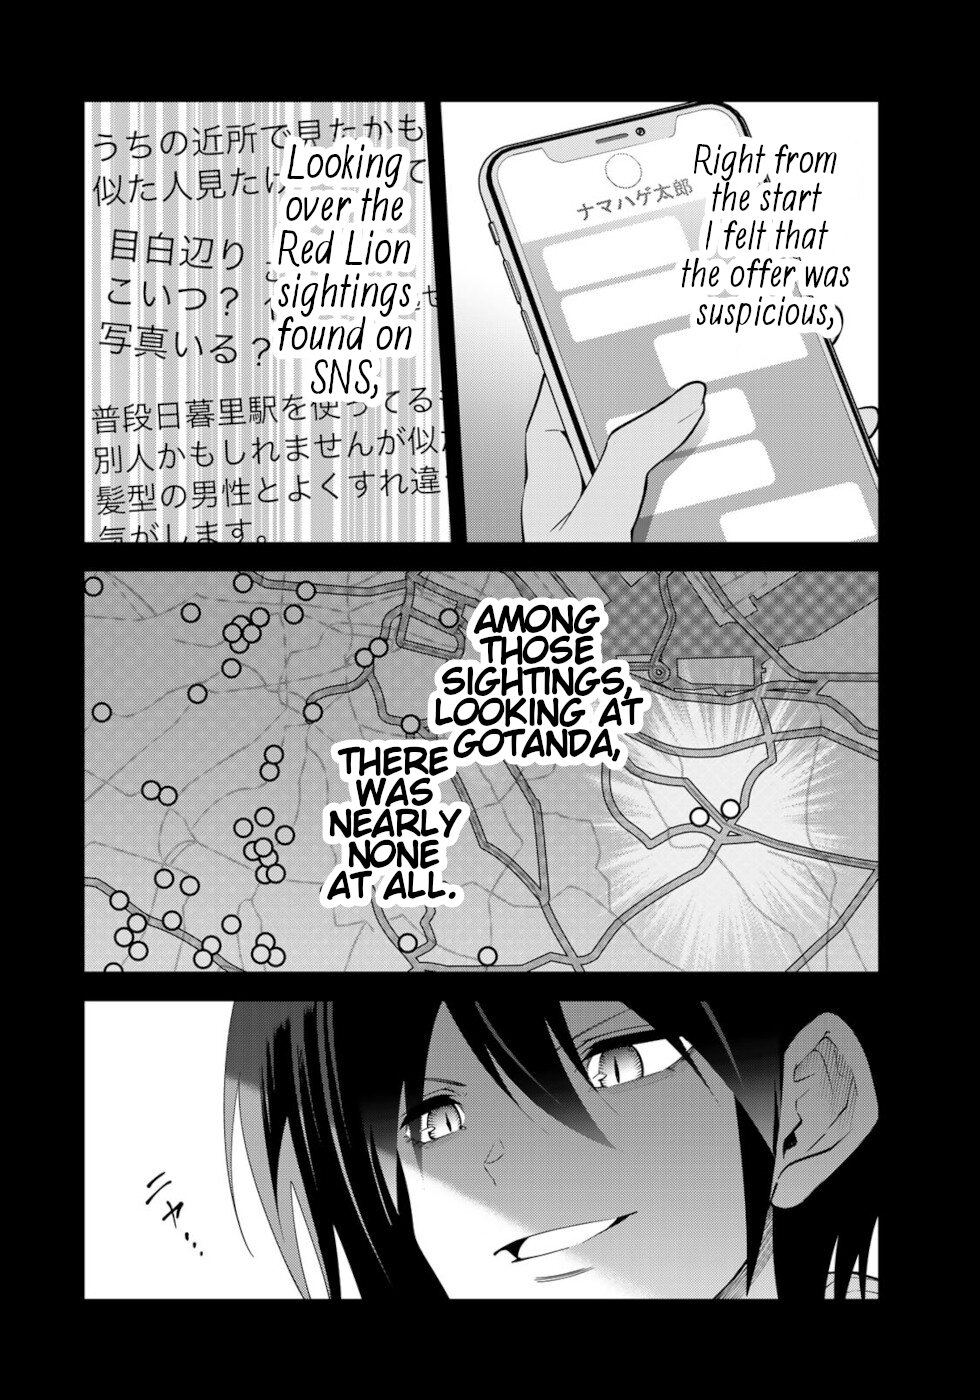 Tokyo Neon Scandal Vol.8 Chapter 75: The Laughing Red Lion 19 - Picture 2